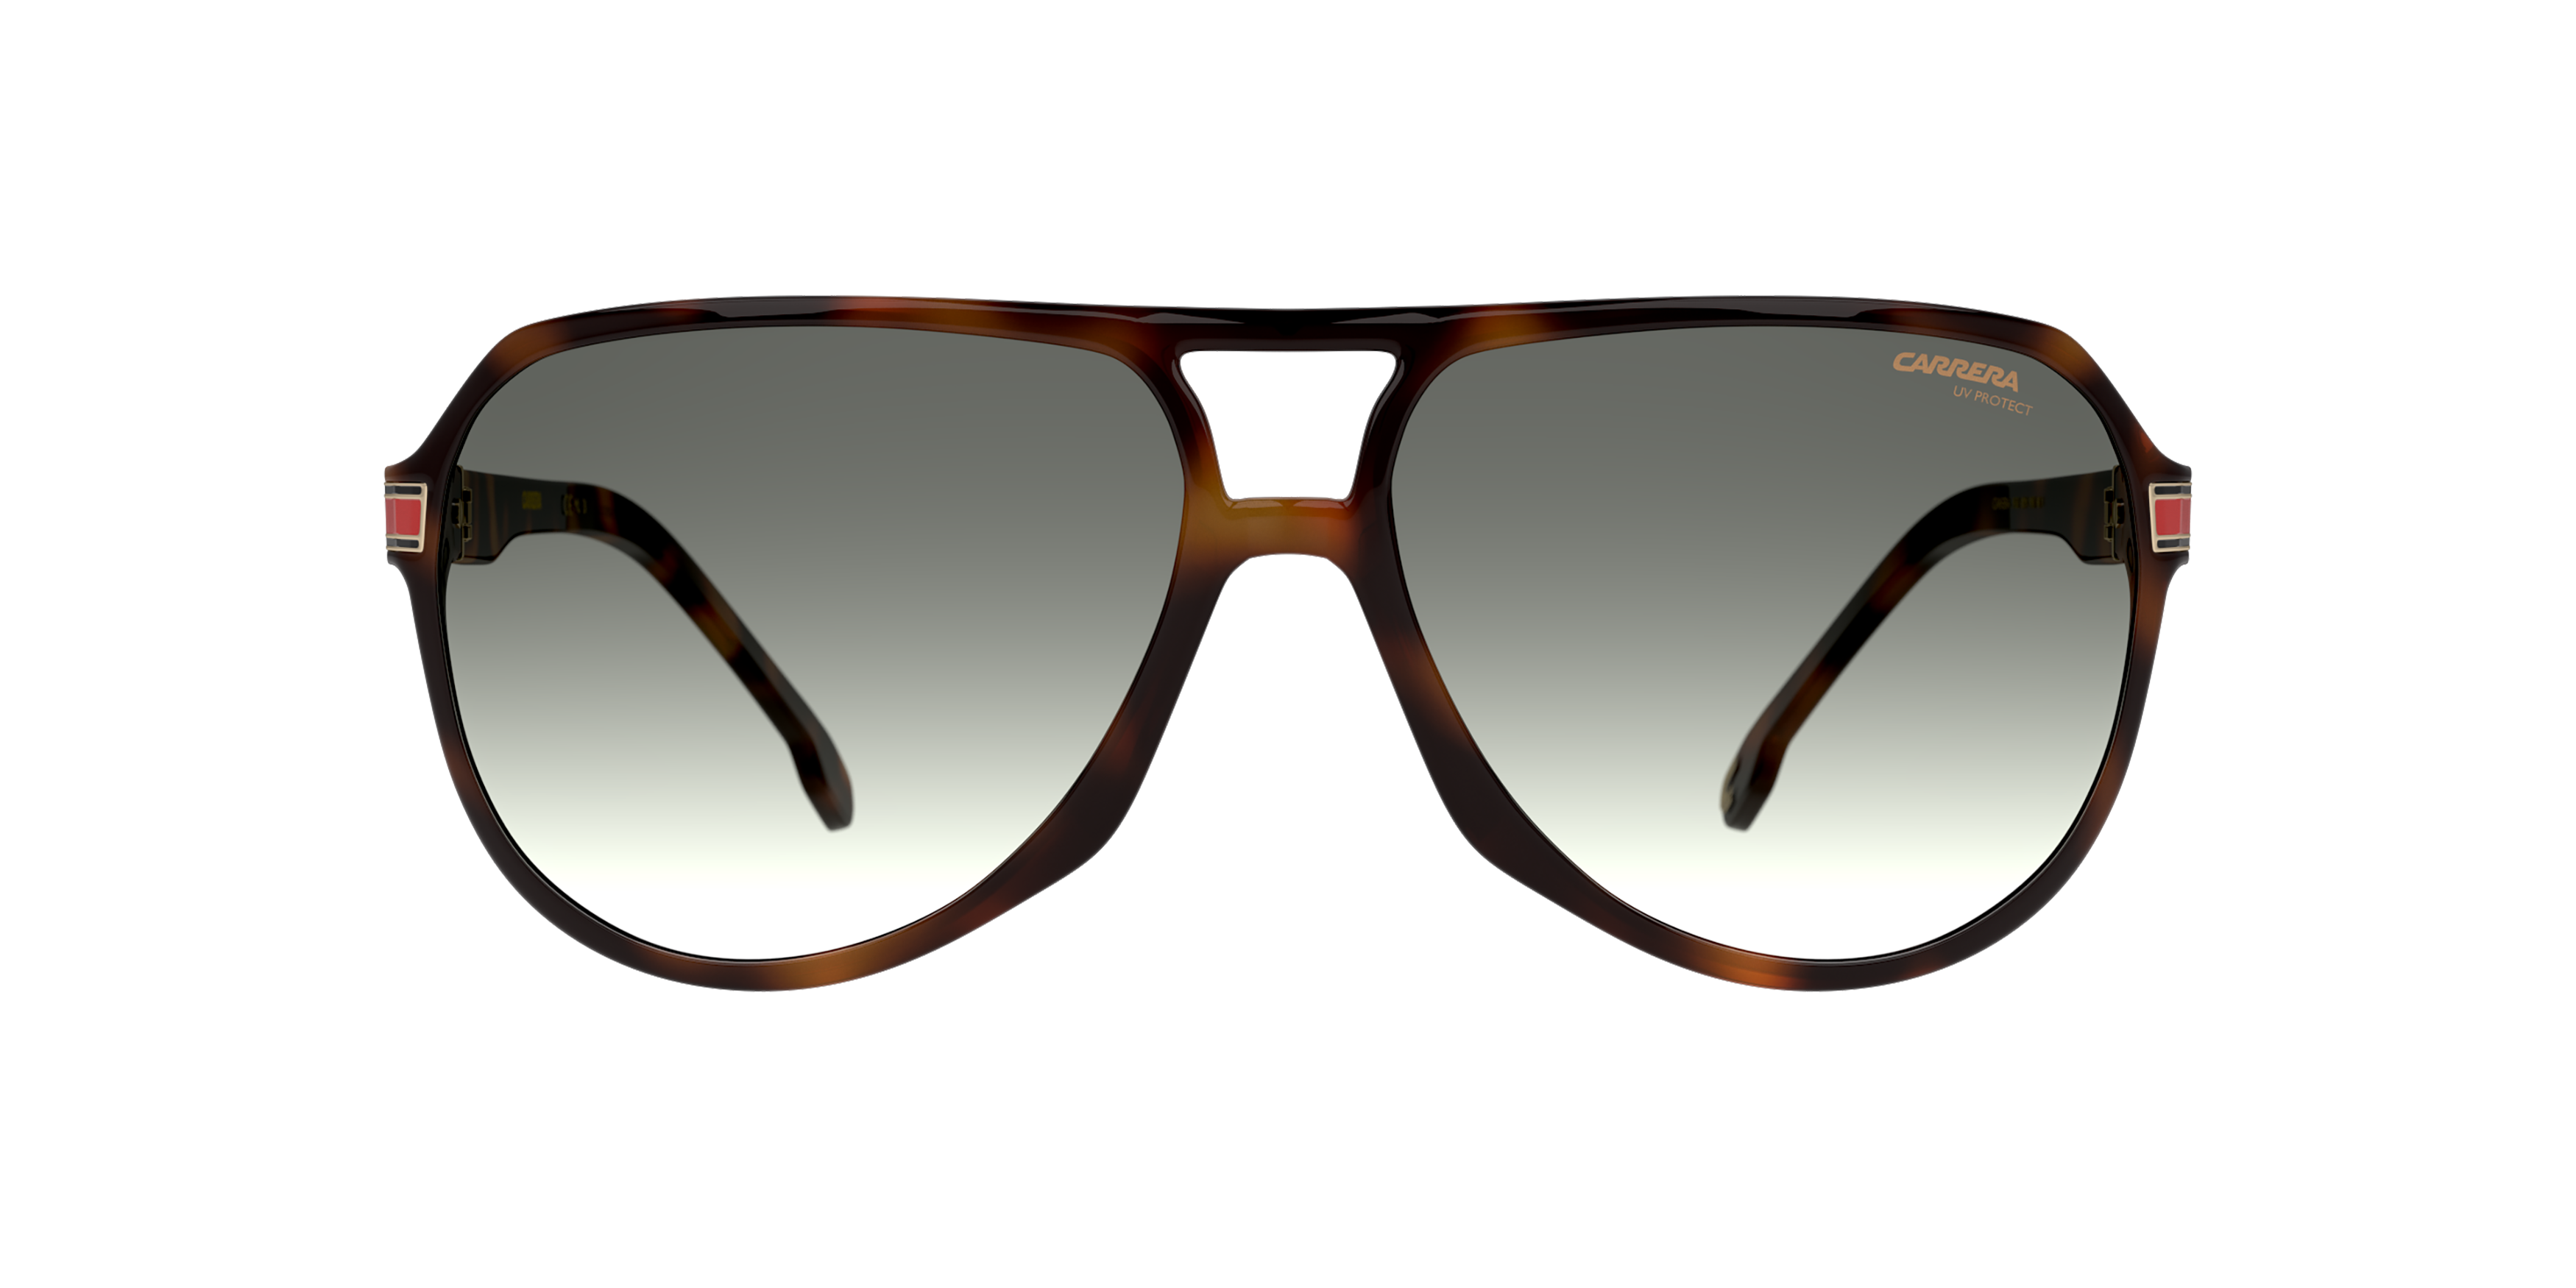 [products.image.front] CARRERA CARRERA 1045/S 086/9K